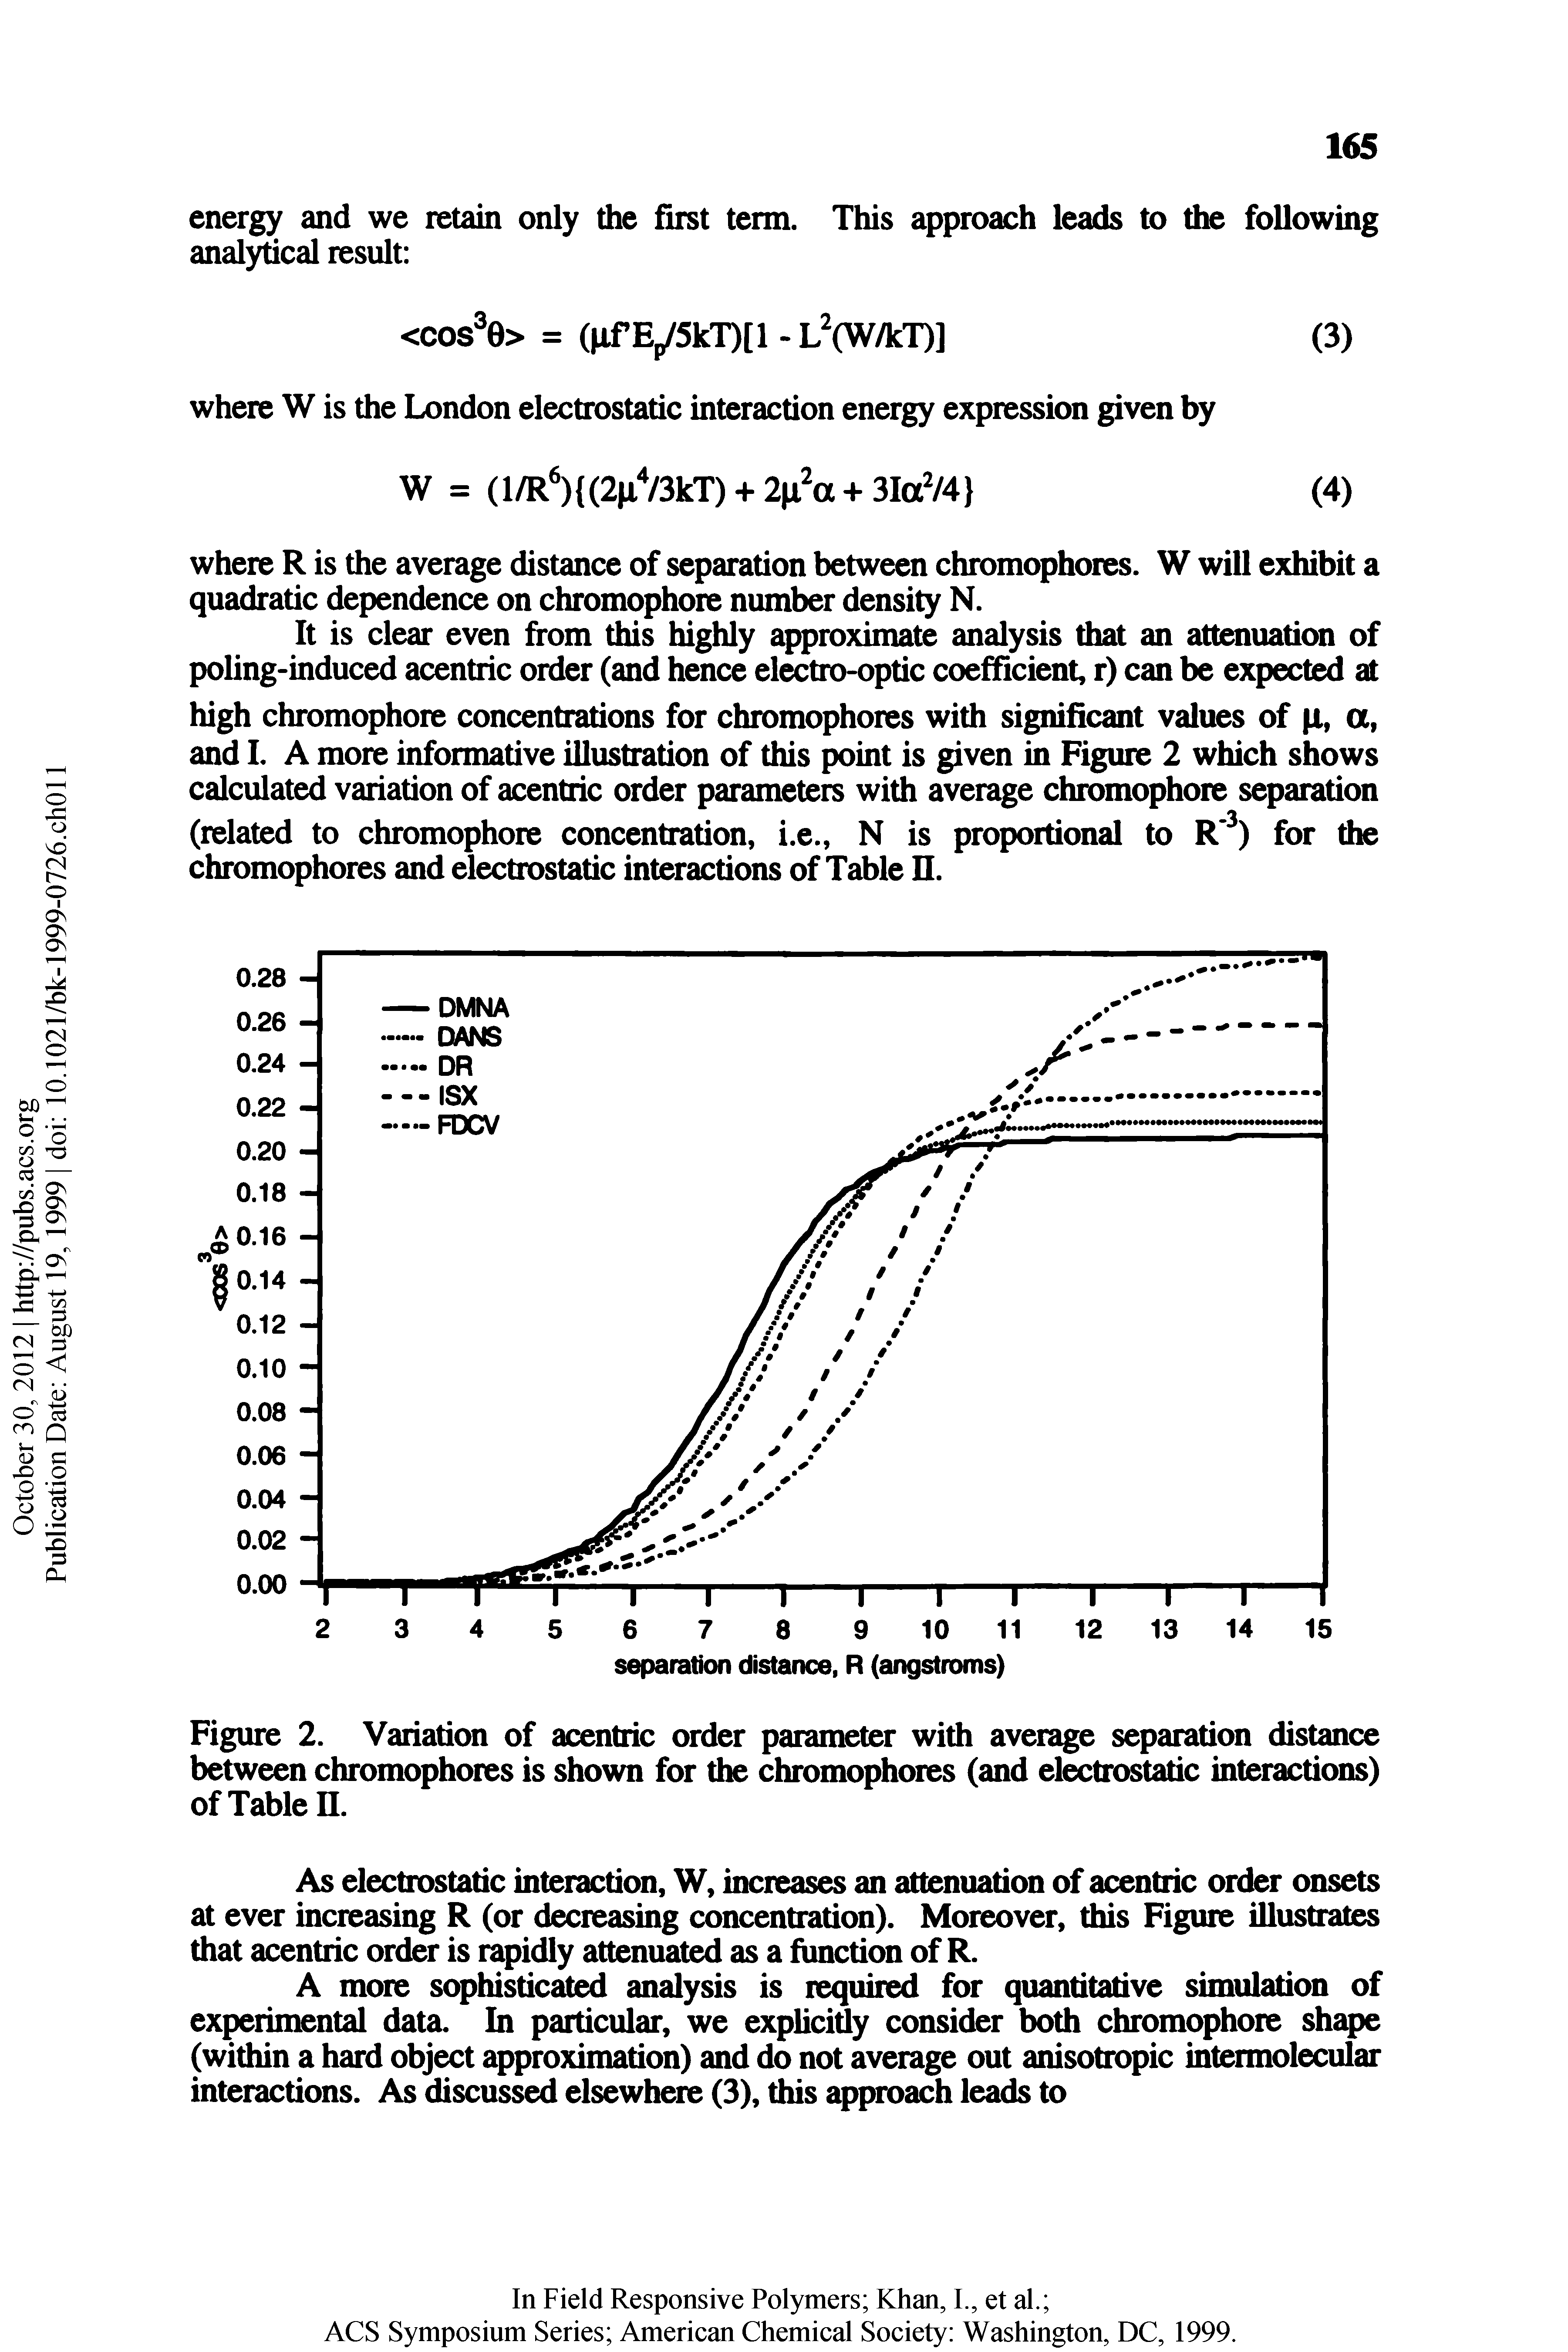 Figure 2. Variation of acentric order parameter with average separation distance between chromophores is shown for the chromophores (and electrostatic interactions) of Table n.